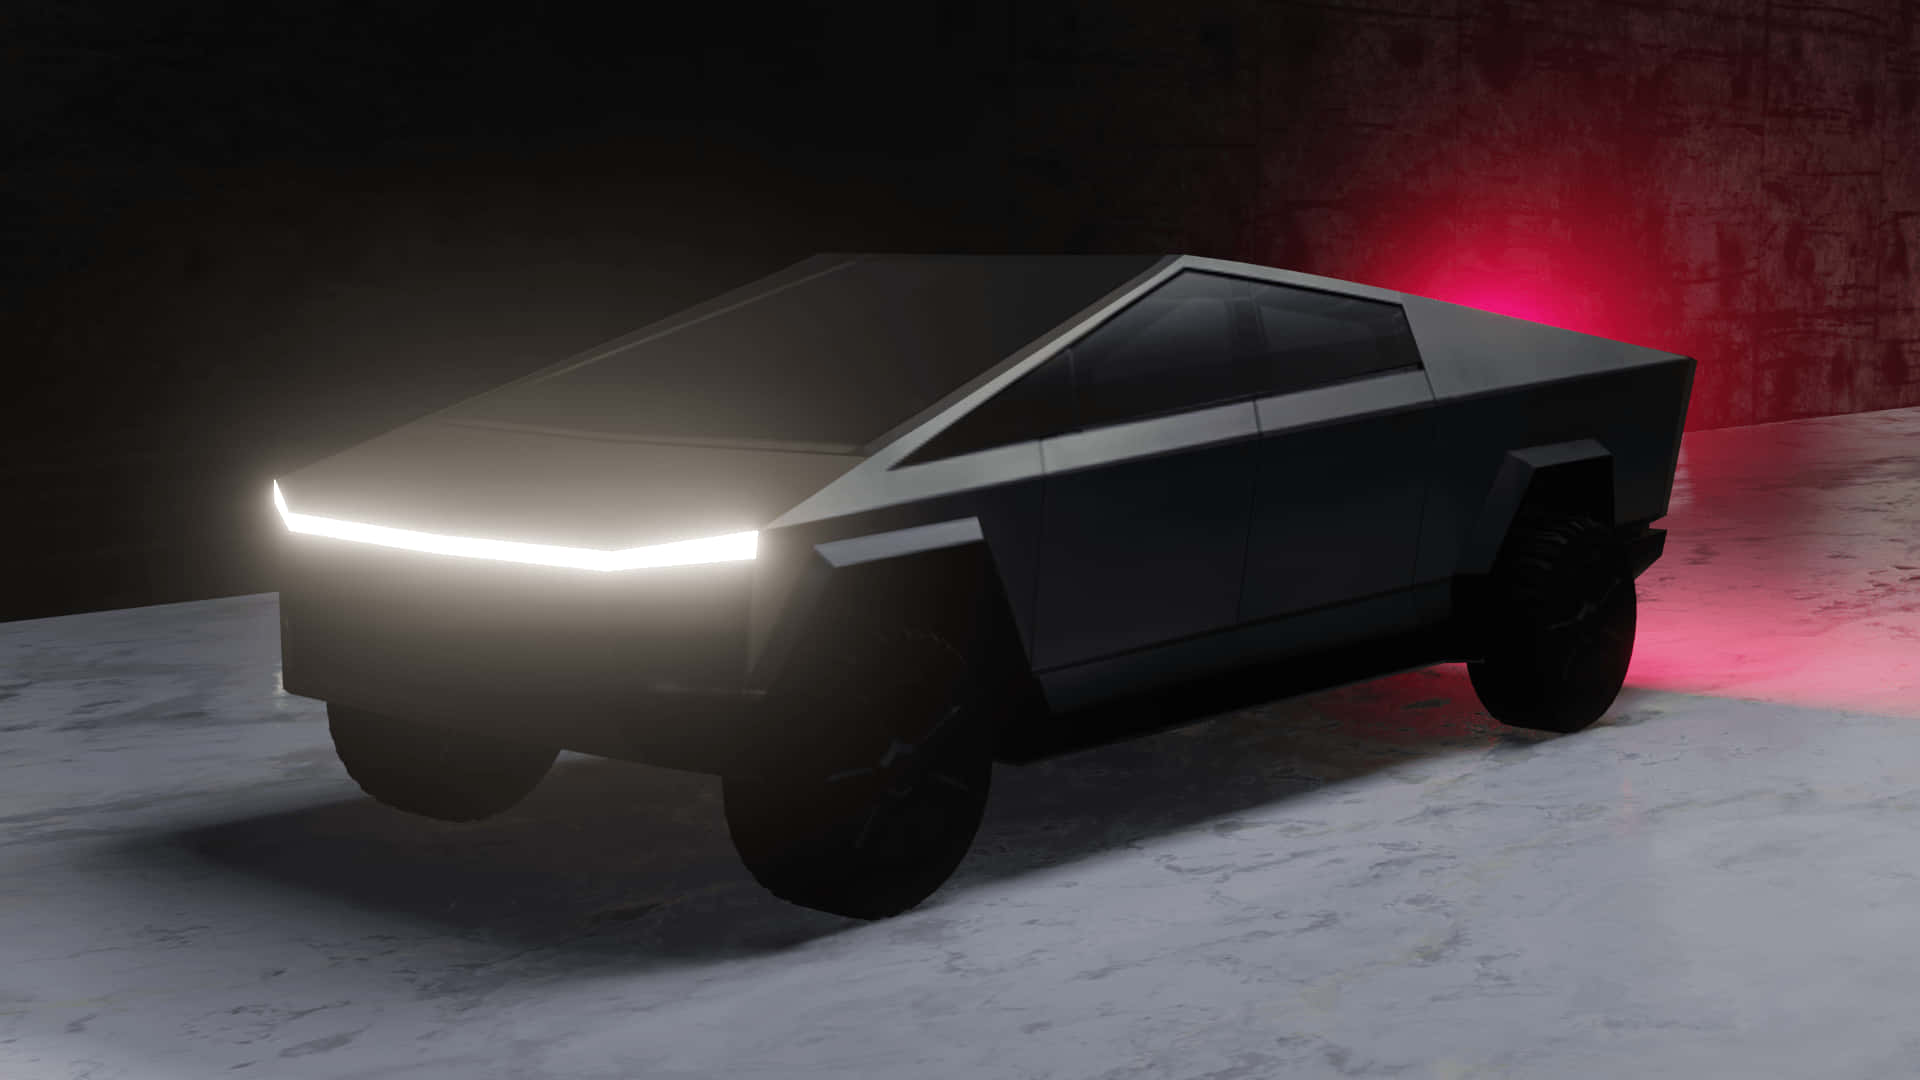 The Tesla Cybertruck - made for those who crave exceptional performance Wallpaper